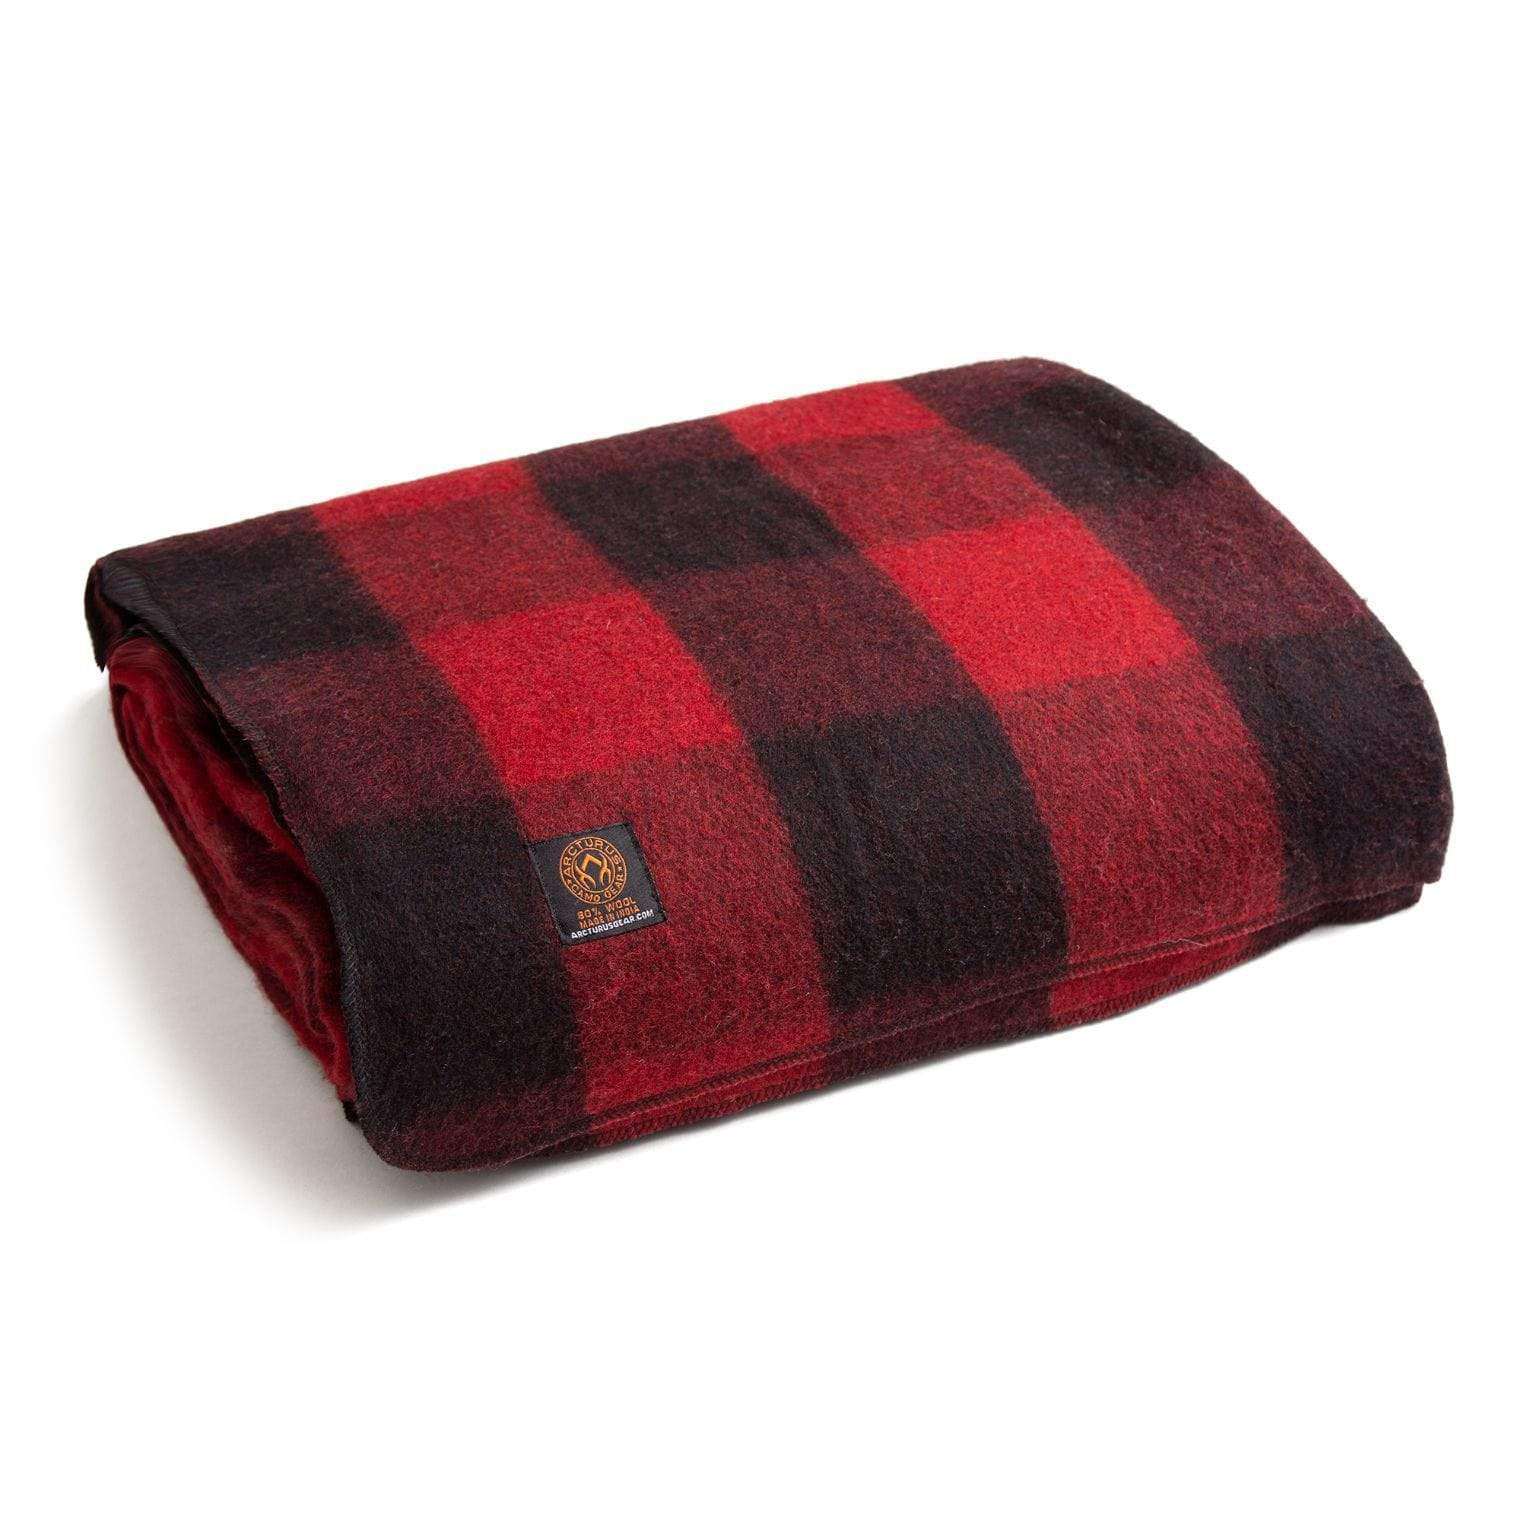 Arcturus Red Buffalo Plaid Wool Blanket, 4.5 lbs - Large 64 x 88 Size ...